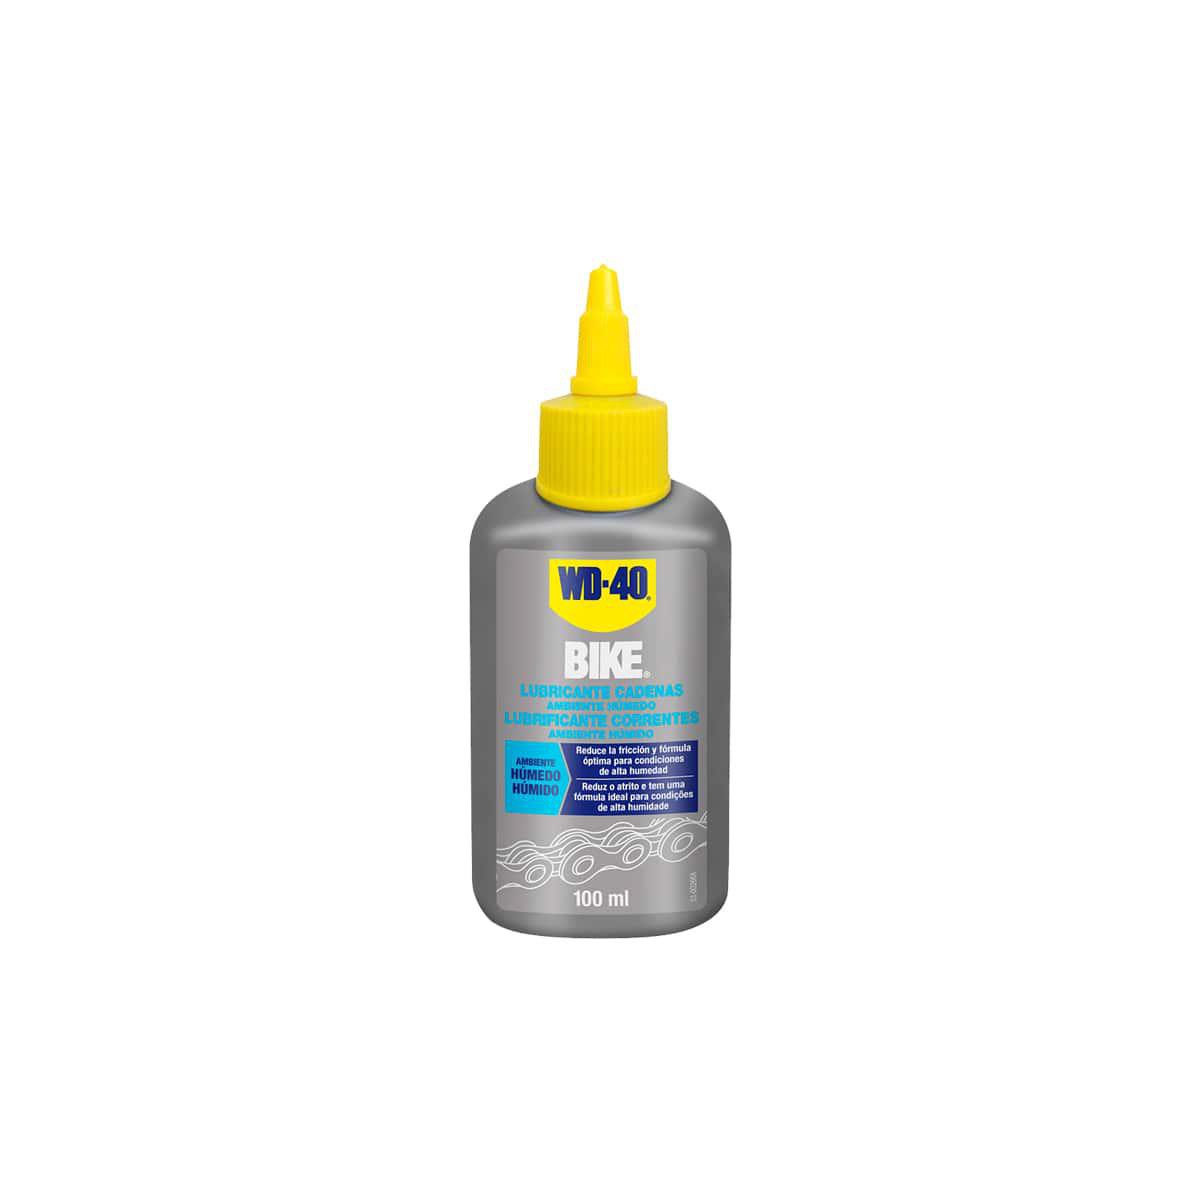 Wd40 - Lubrifiant humide WD40 100ml - Mastic, silicone, joint